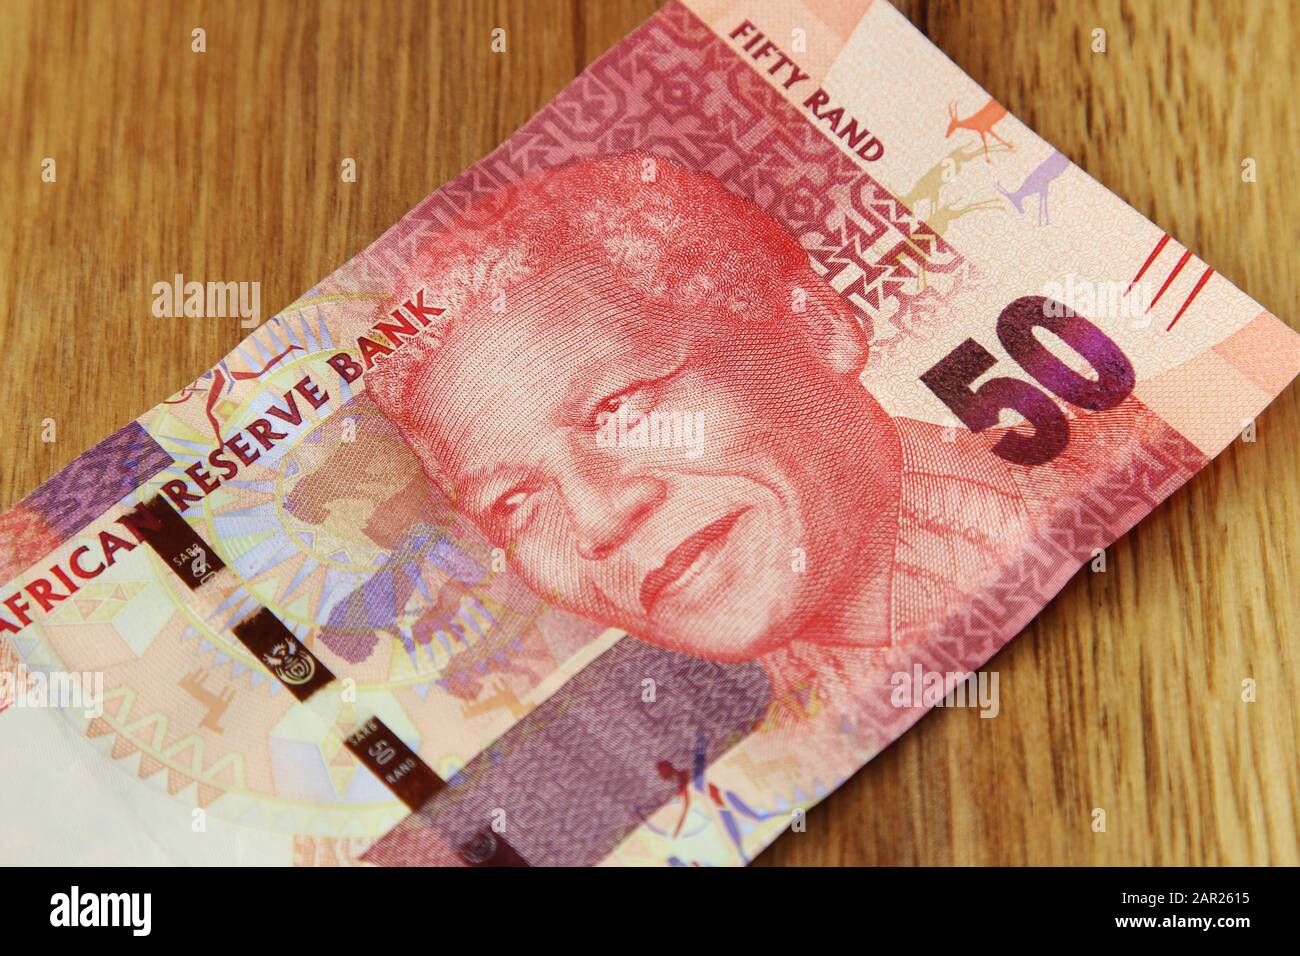 50 Rand Note High Resolution Stock Photography and Images - Alamy